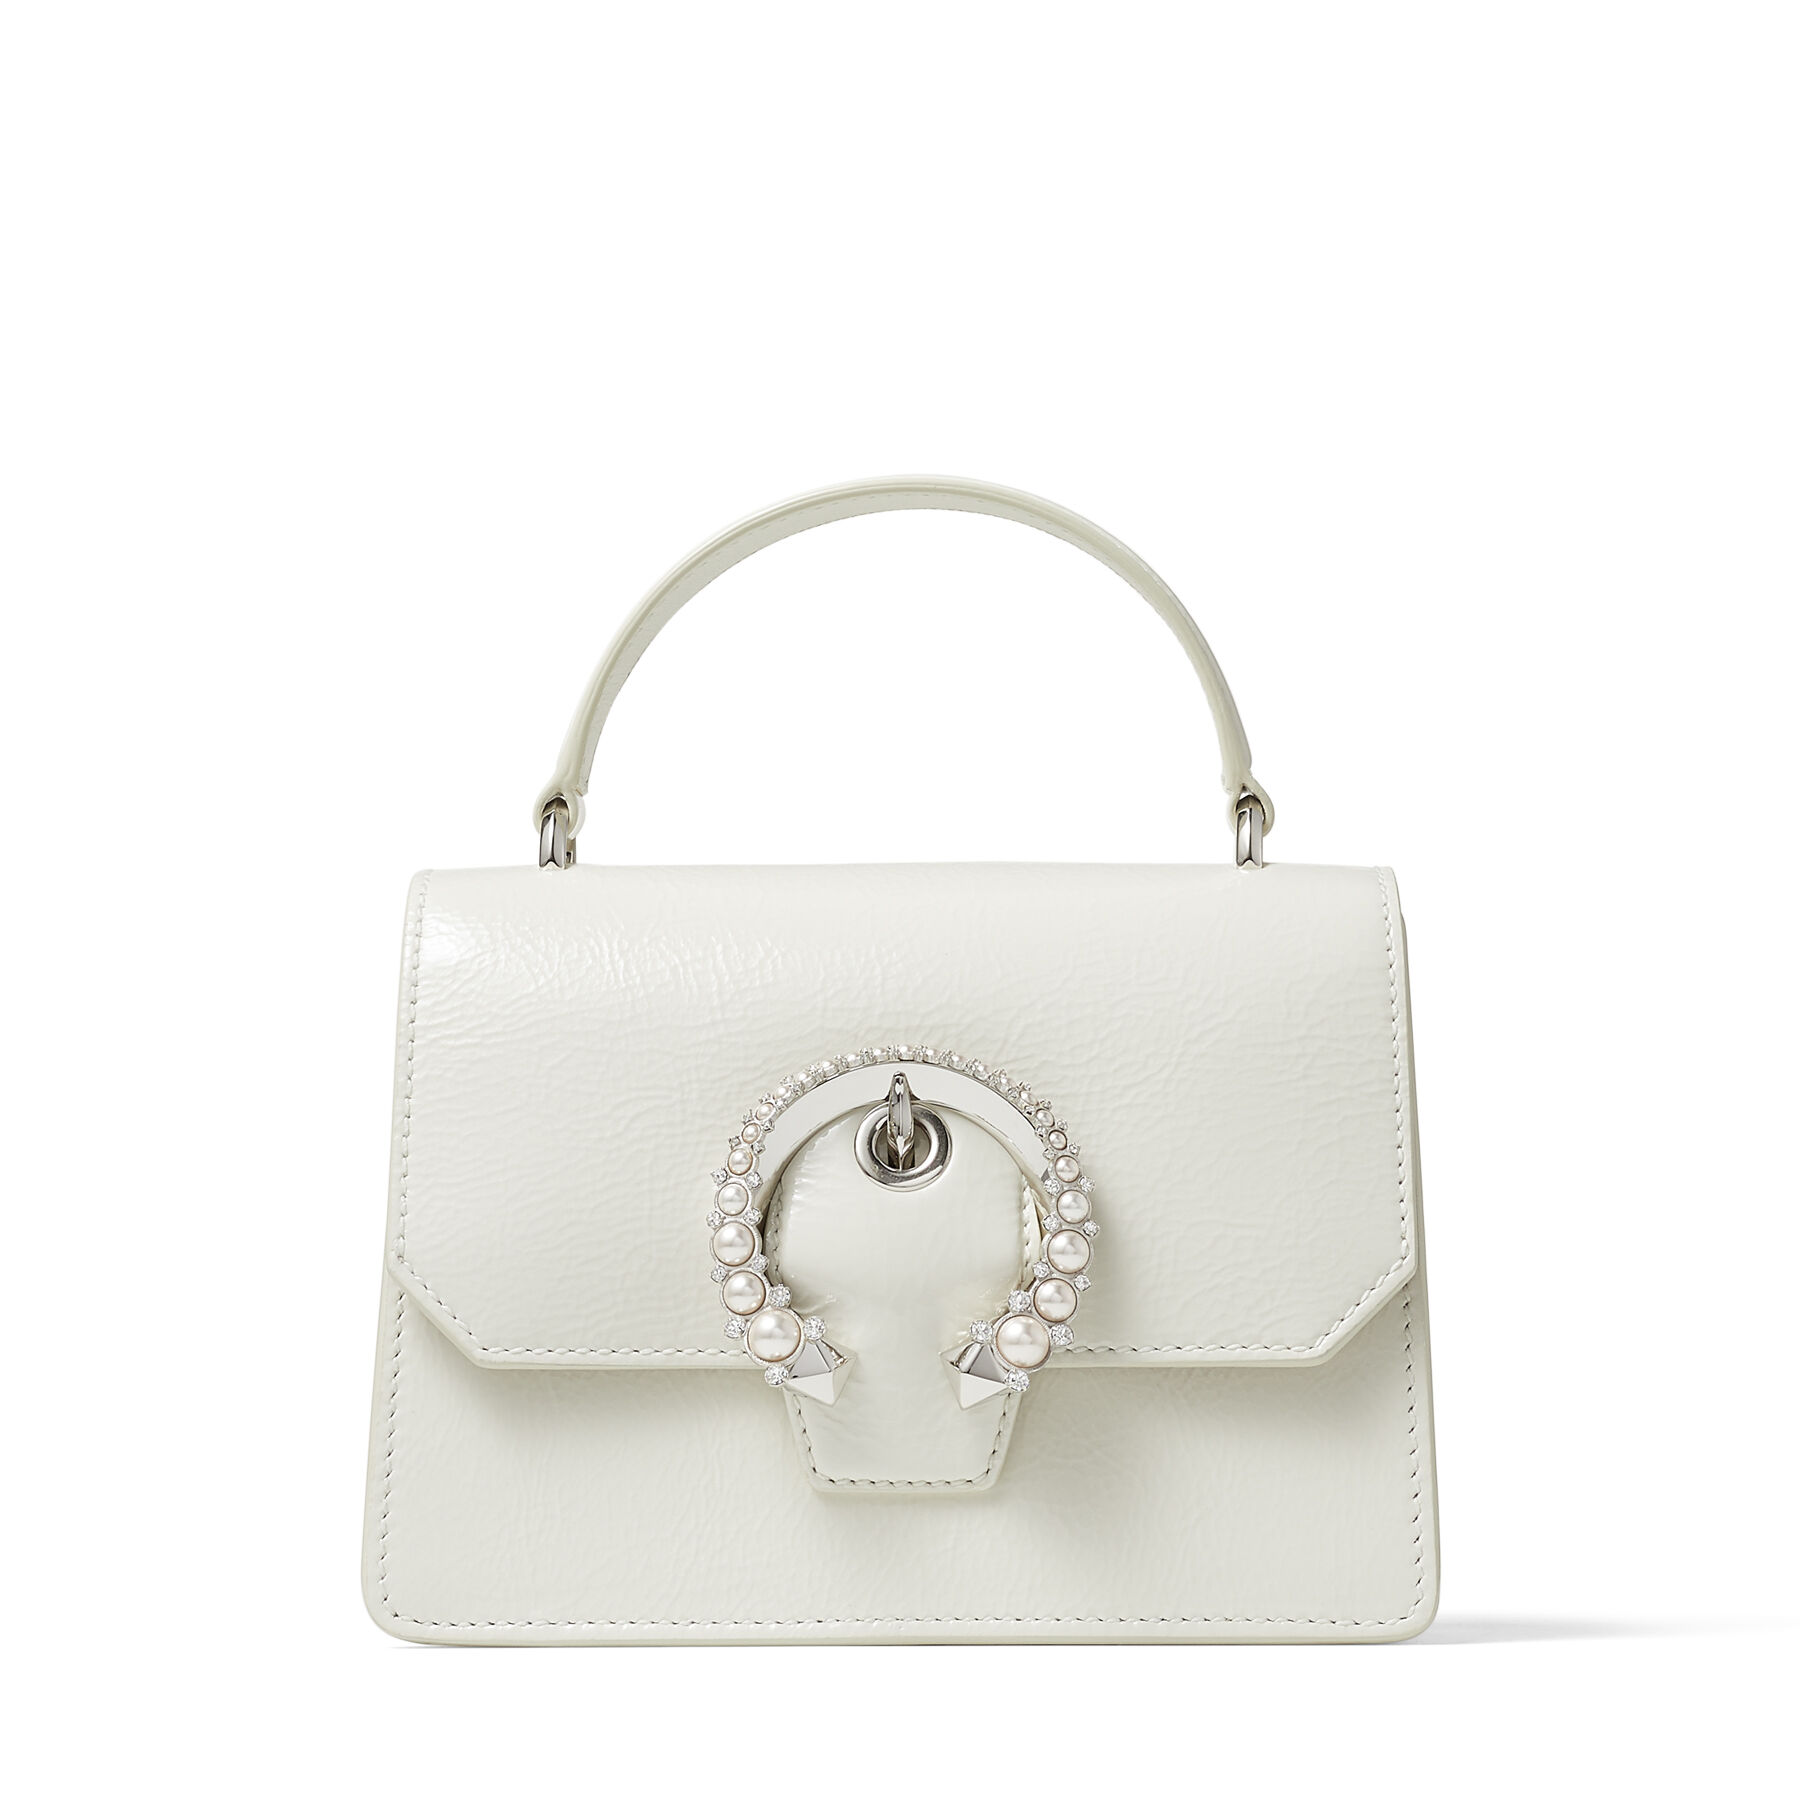 Latte Patent Textured Leather Satchel with Pearl Buckle | MADELINE ...